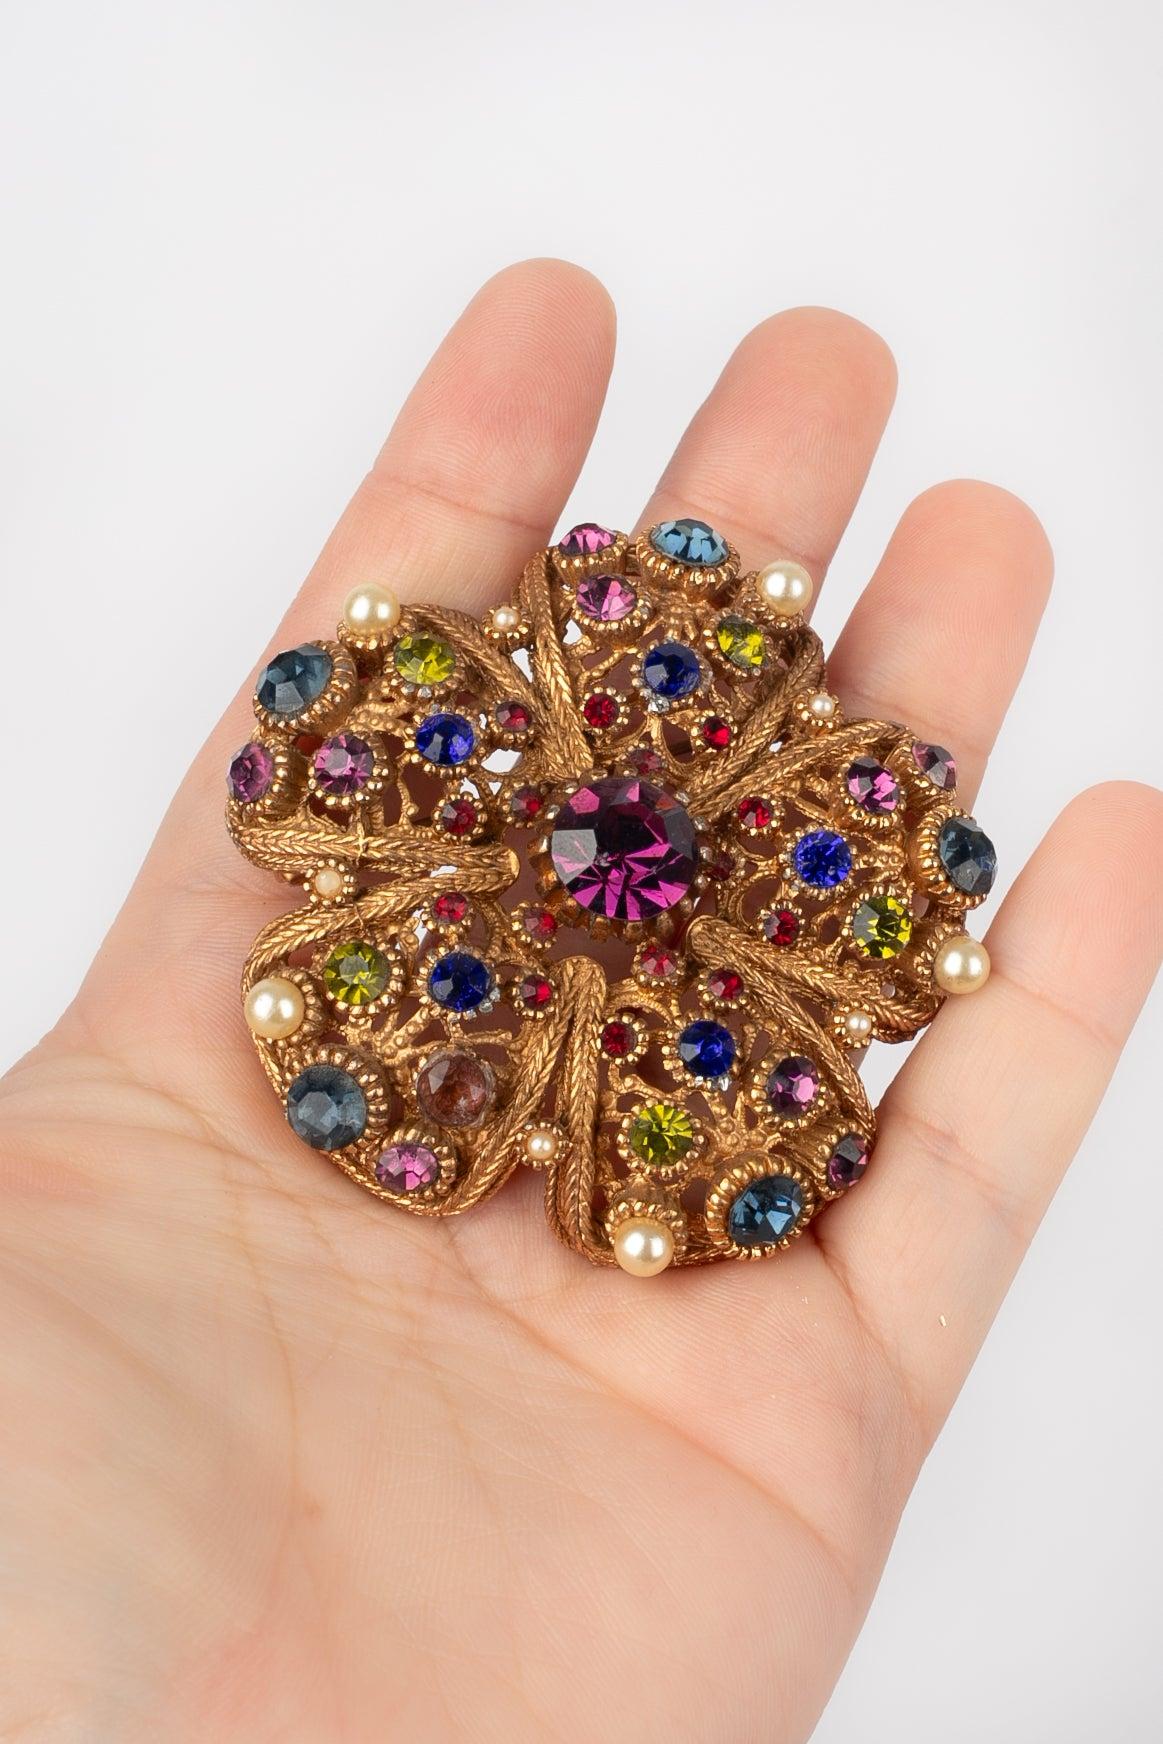 Nina Ricci Flower Brooch with Colored Rhinestones and Pearls For Sale 2